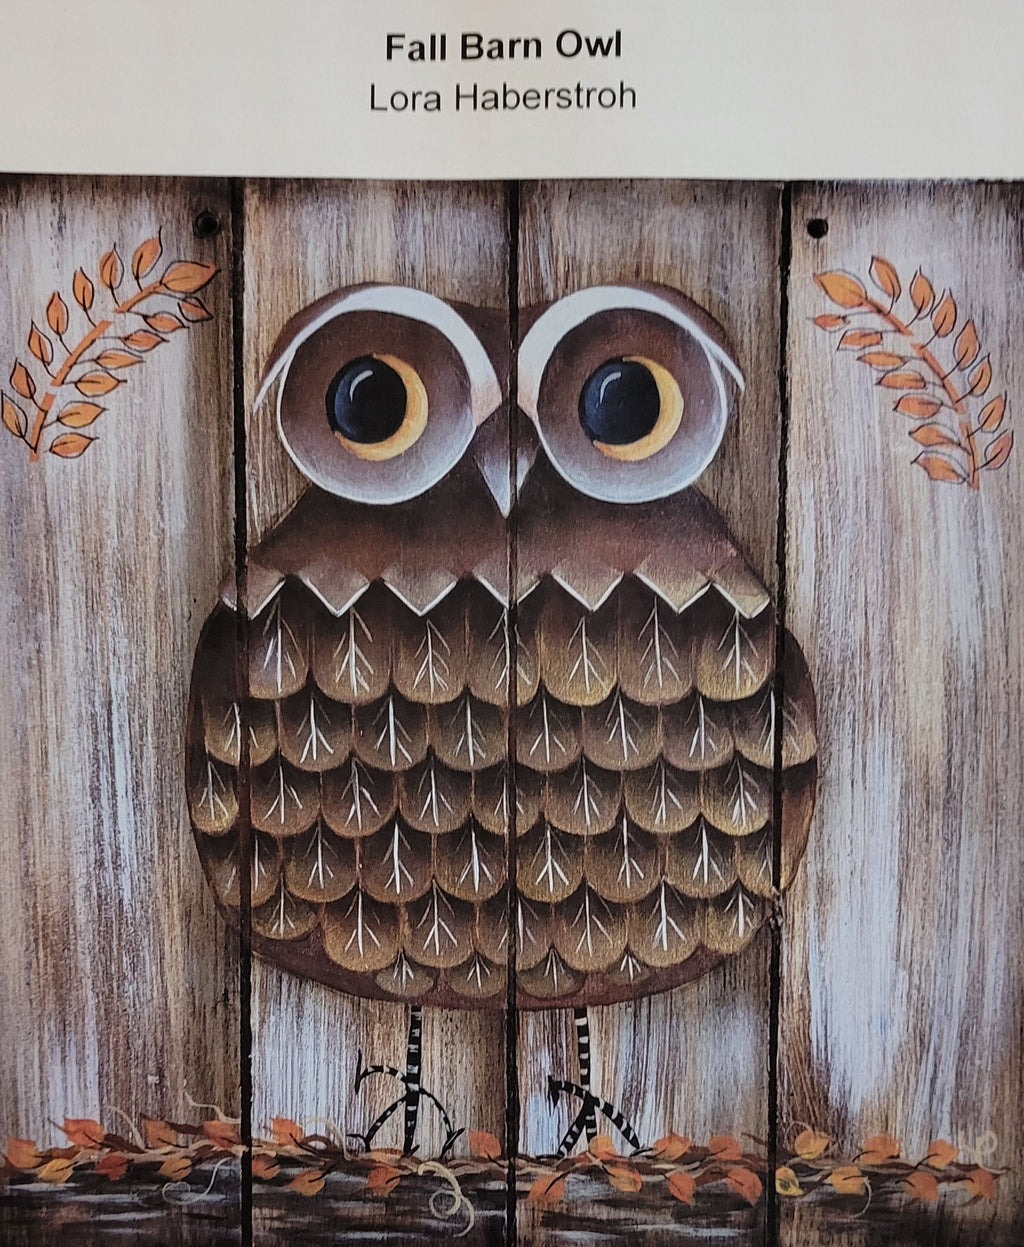 Fall Barn Owl packet by Lora Haberstroh